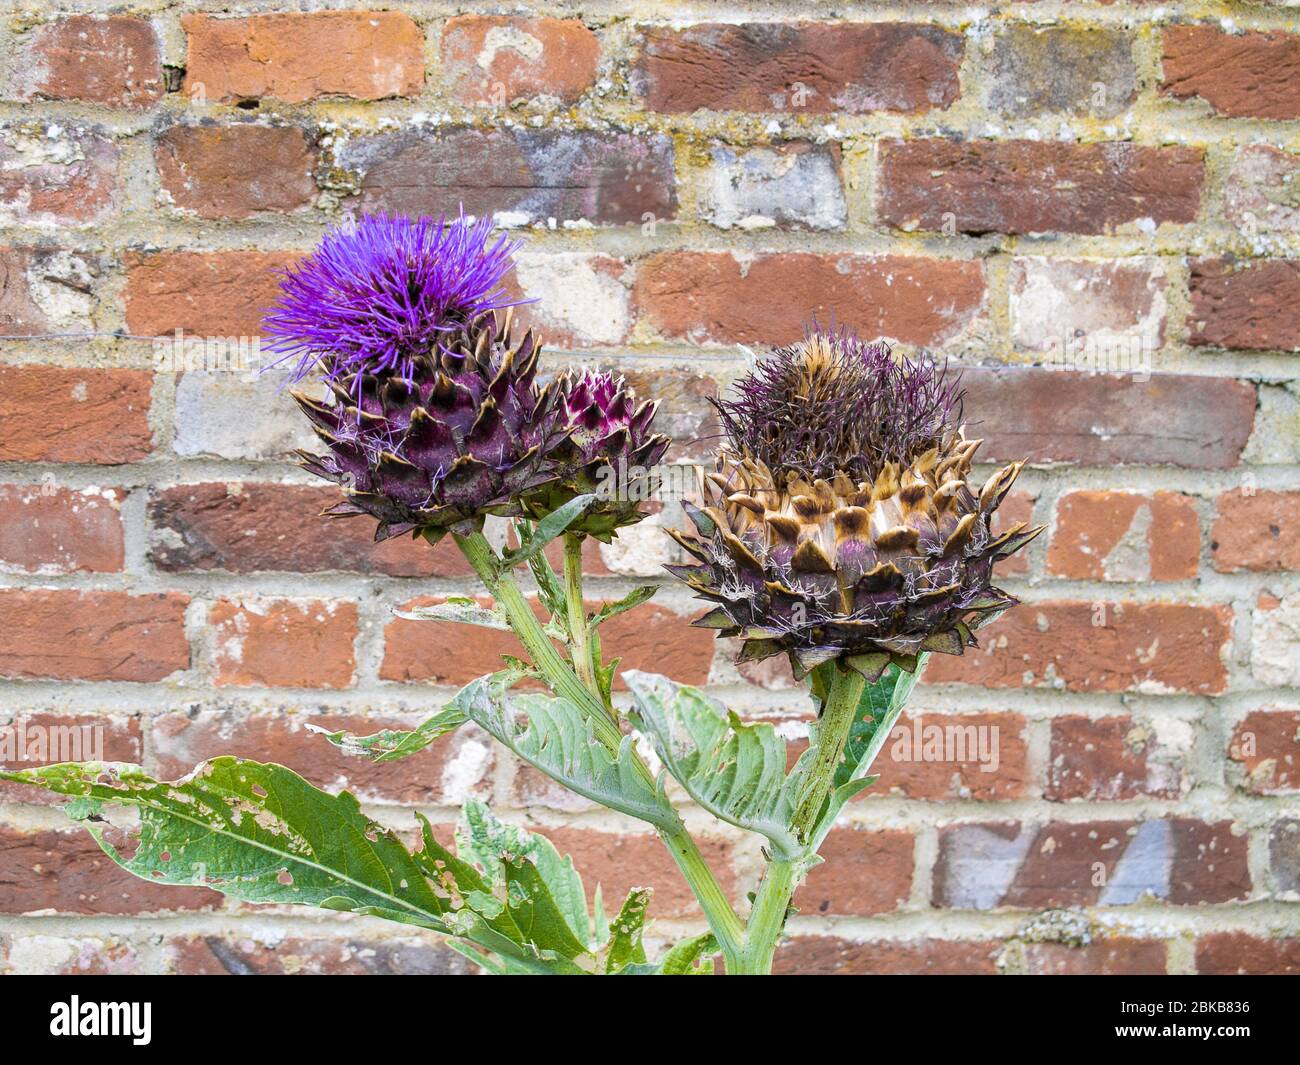 Three thistle flowers against a red brick wall in an Oxfordshire garden Stock Photo